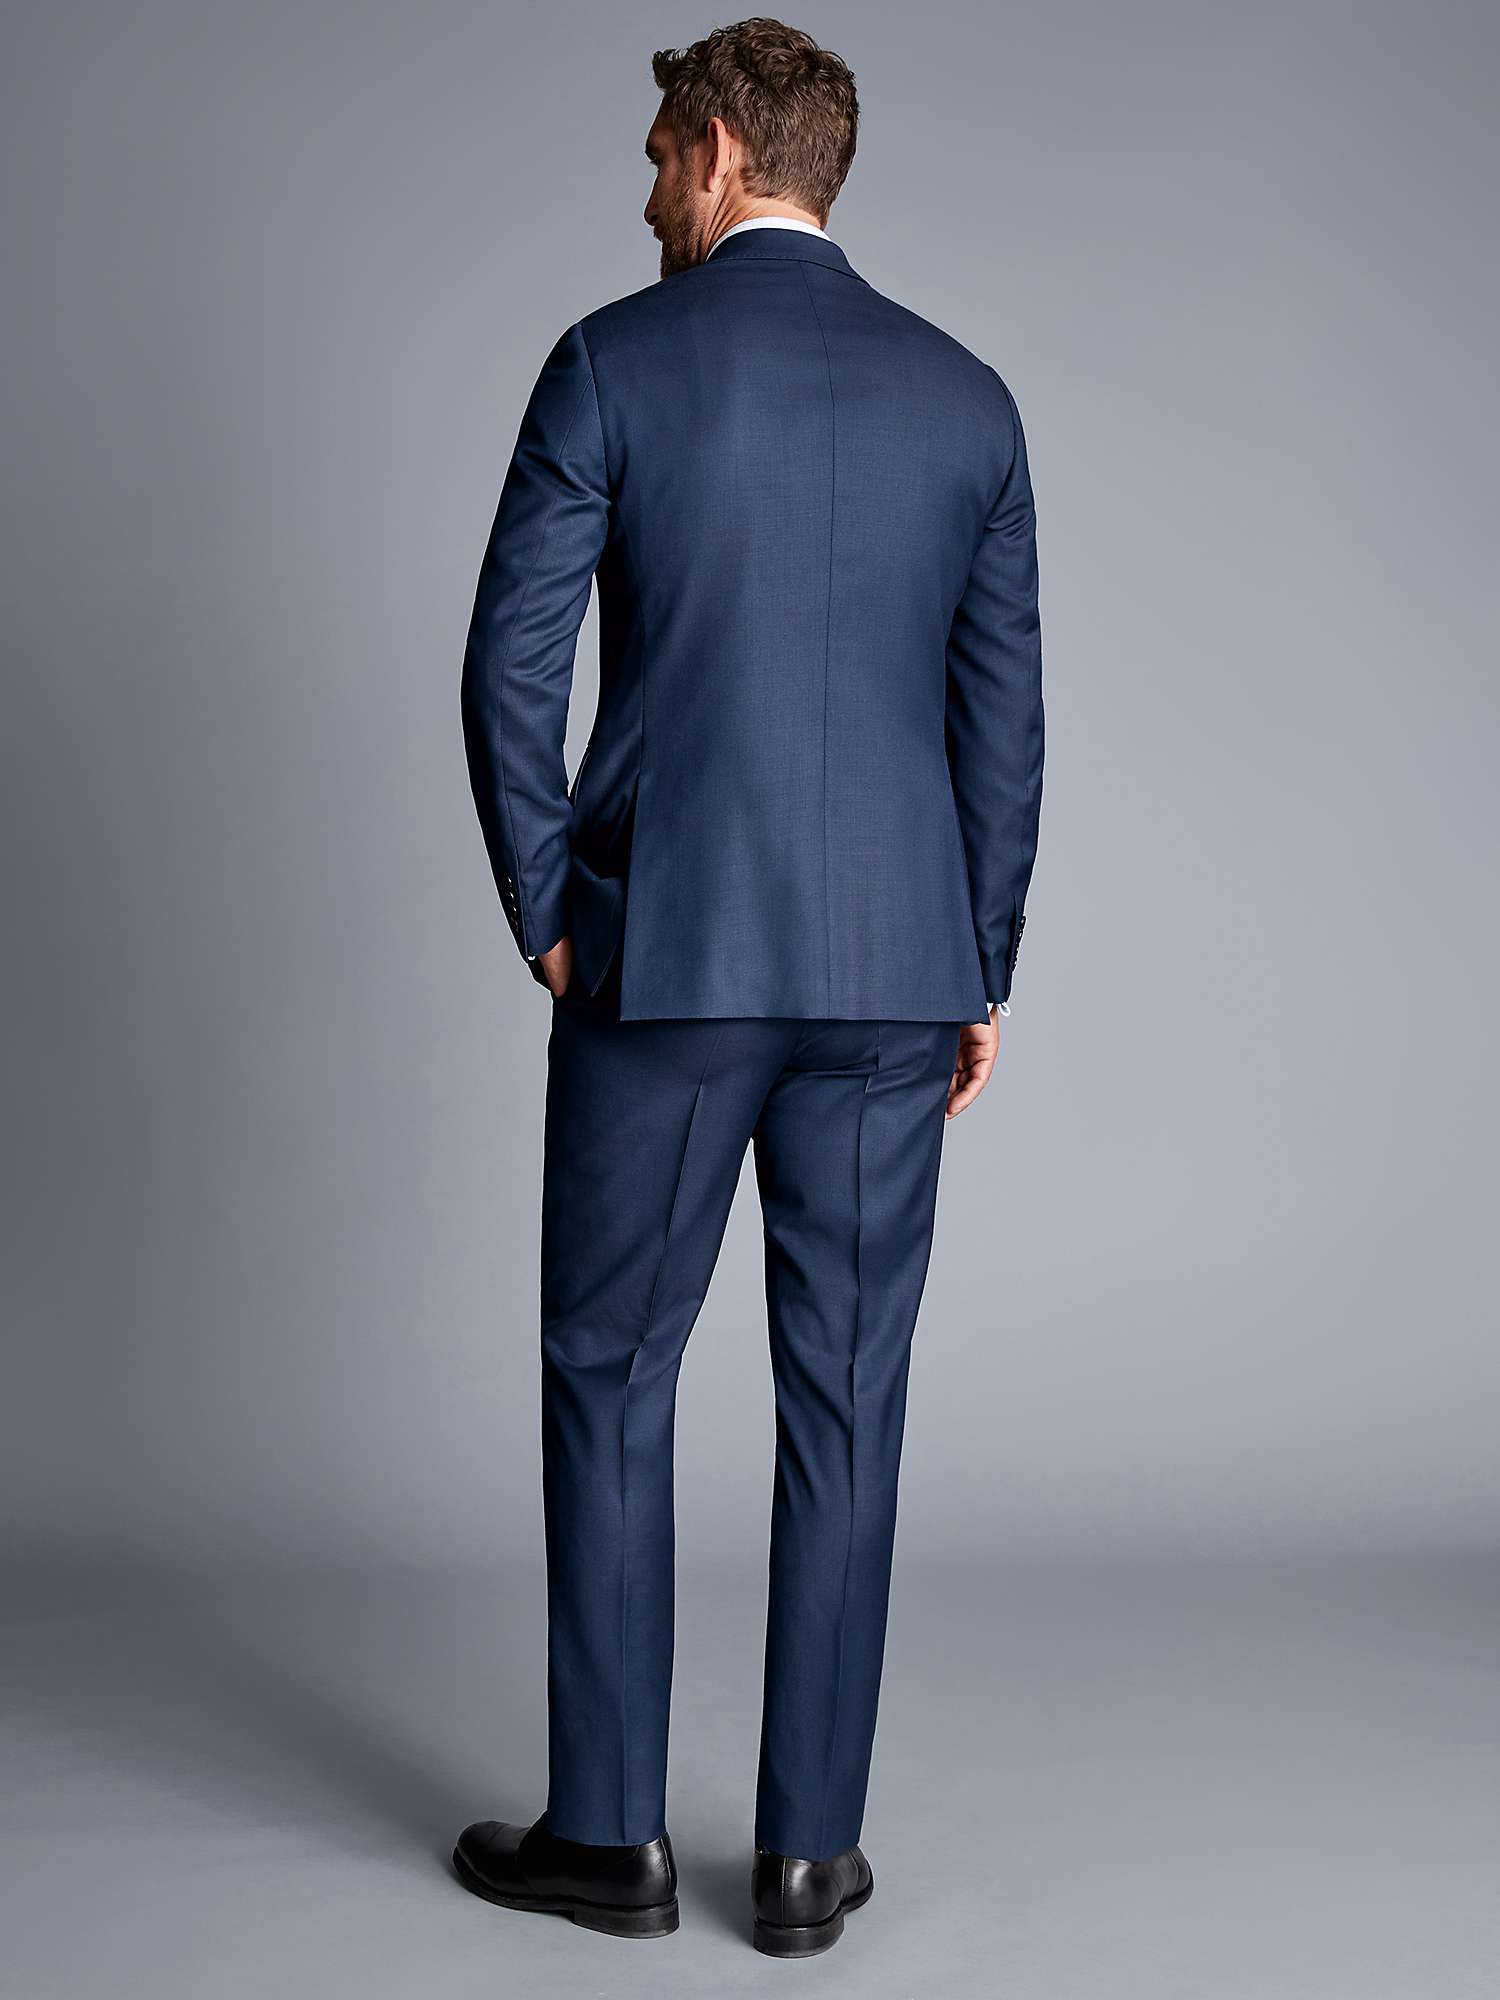 Buy Charles Tyrwhitt Slim Fit Natural Stretch Twill Suit Jacket, Royal Blue Online at johnlewis.com